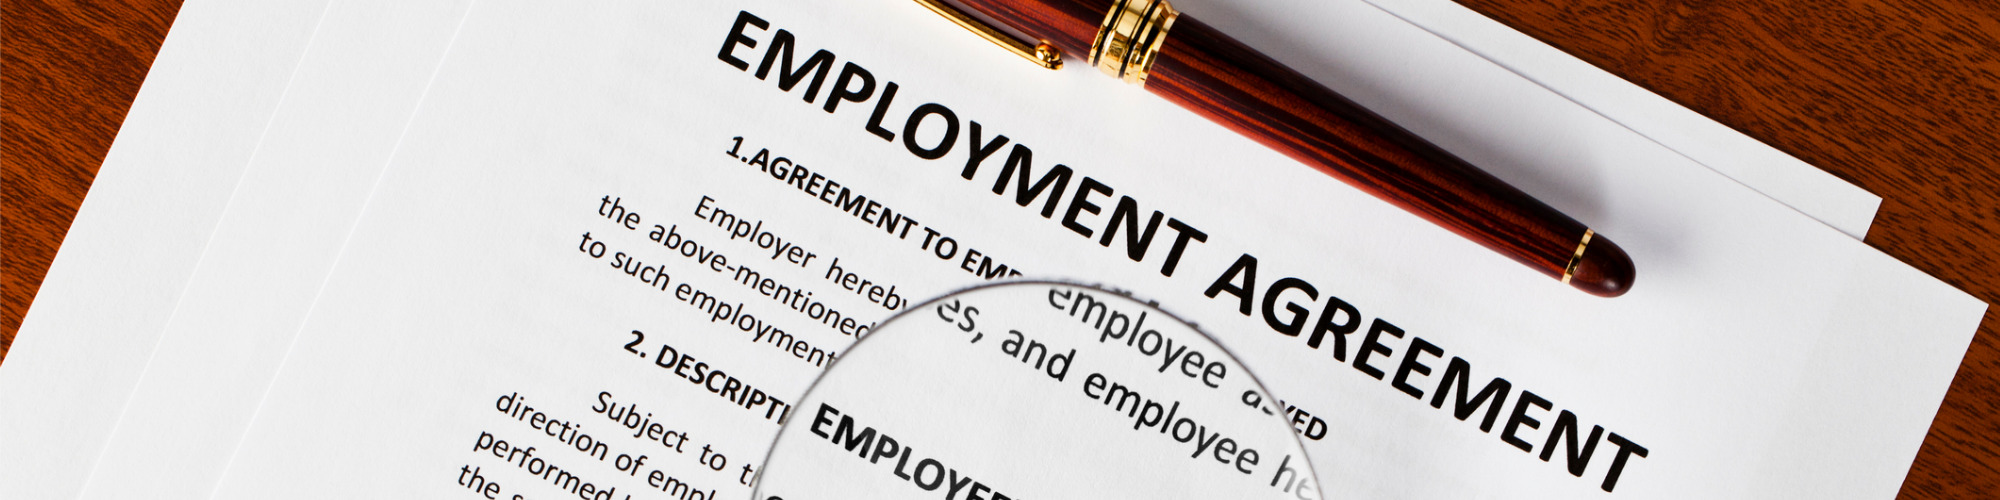 Contracts of Employment - Which One to Use & Why?